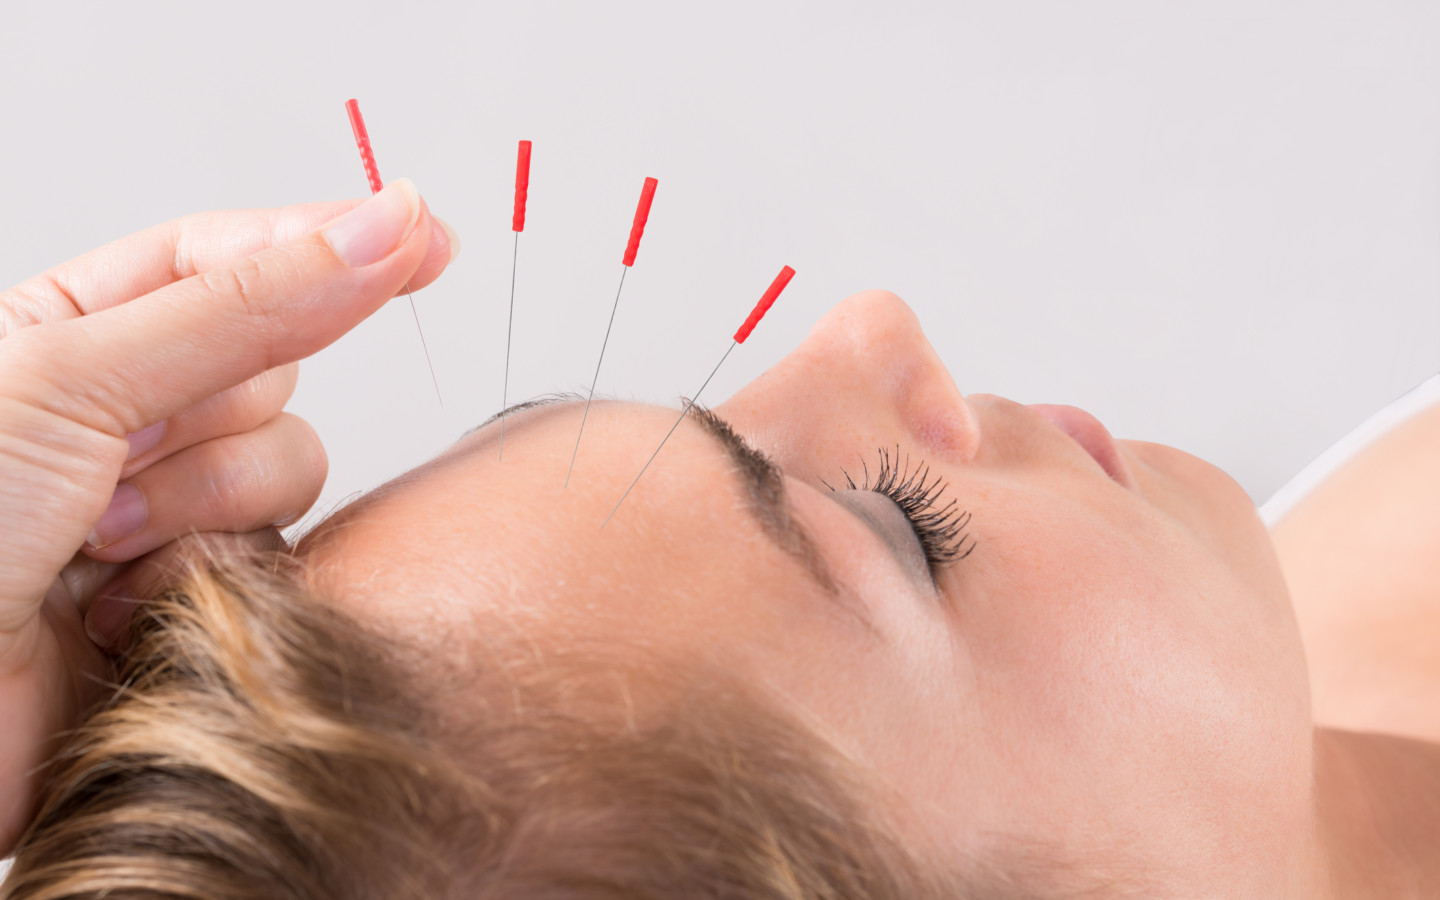 Acupuncture is a holistic lifestyle service